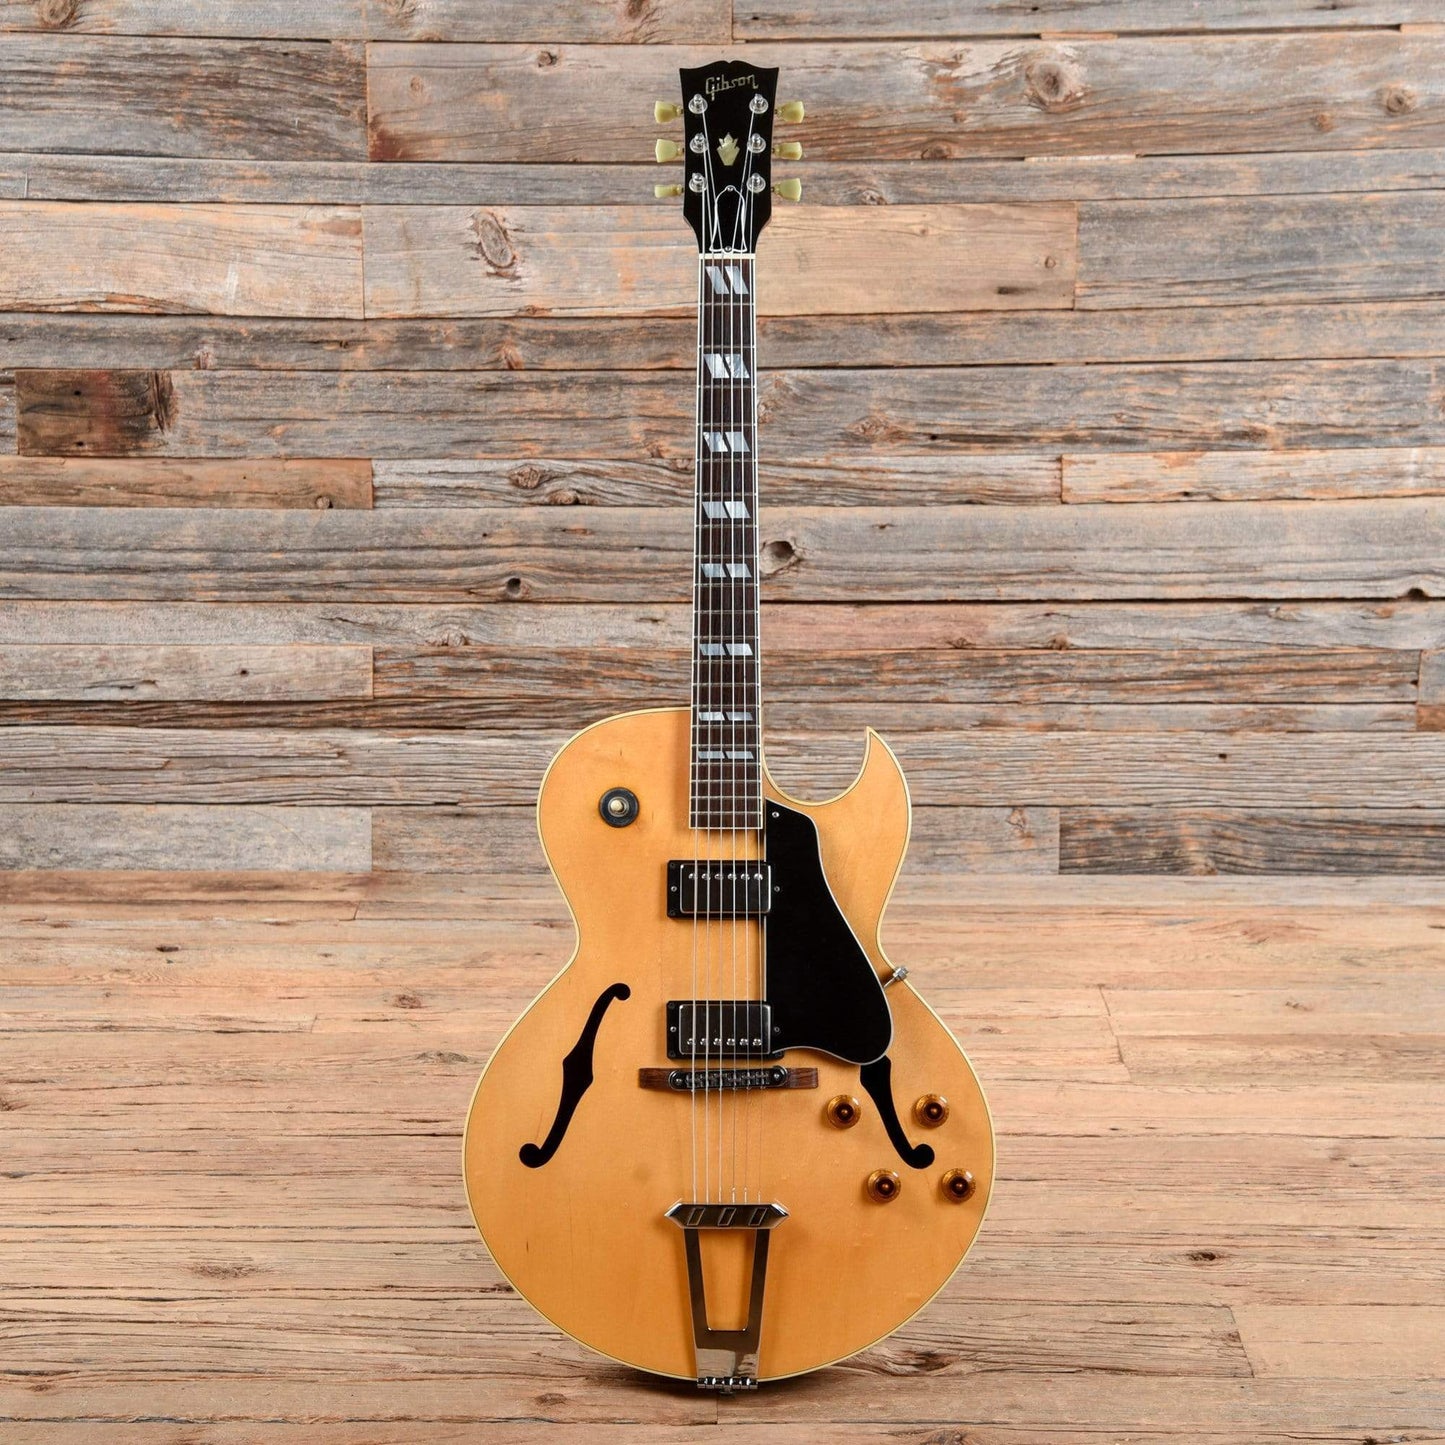 Gibson ES-175 Natural 1987 Electric Guitars / Hollow Body